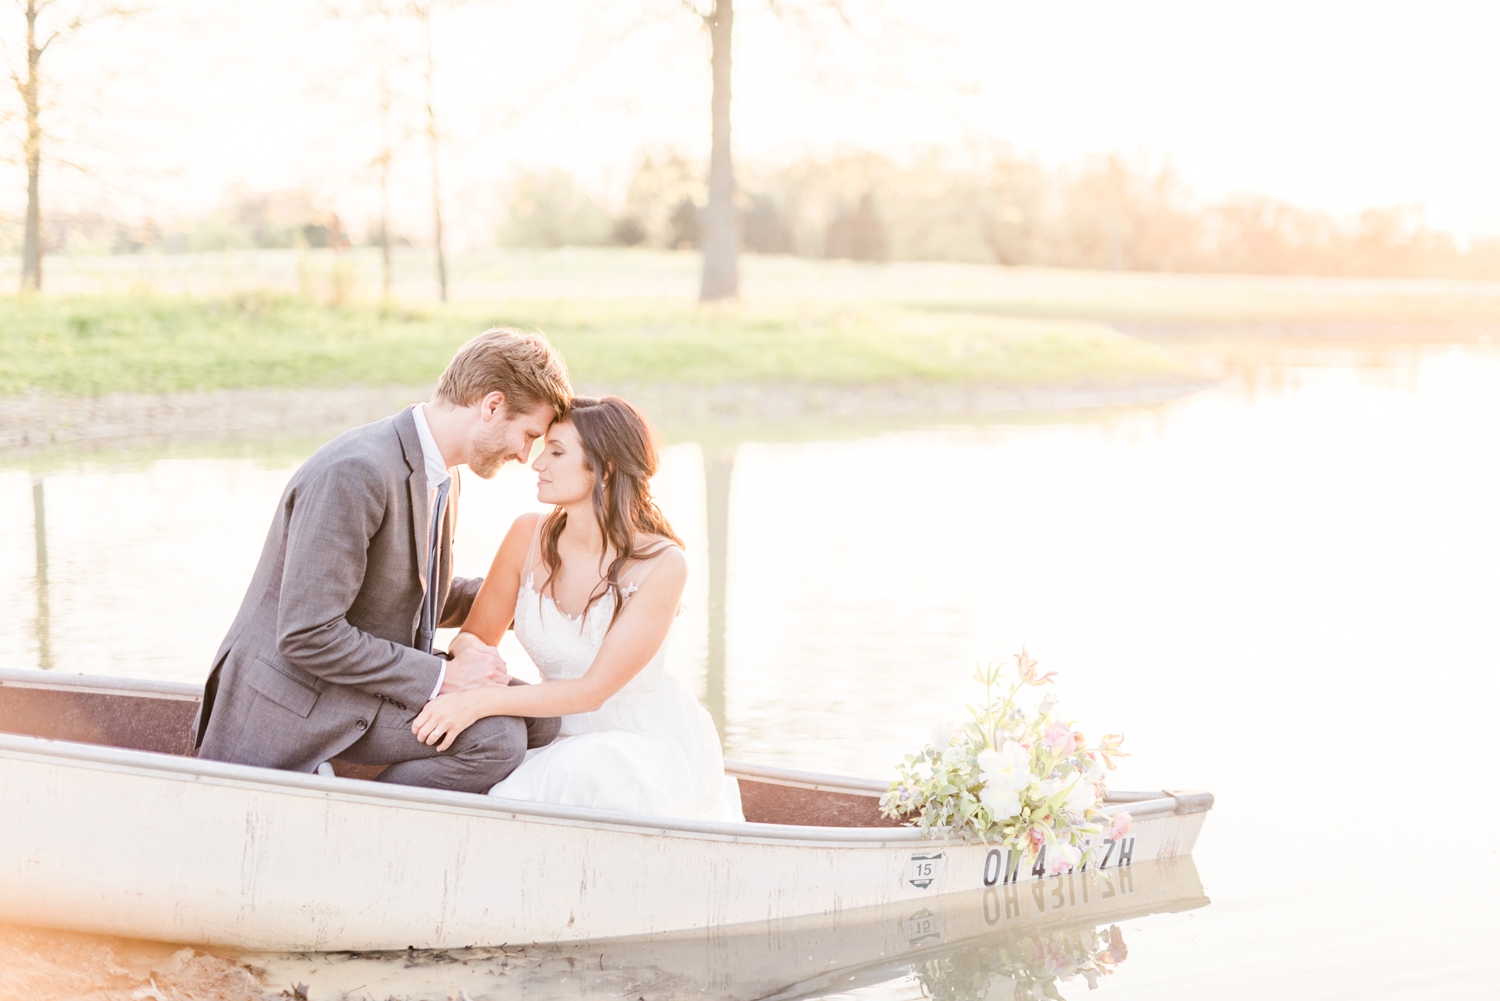 bride-and-groom-wedding-portraits-in-a-boat-at-jorgensen-farms-oak-grove